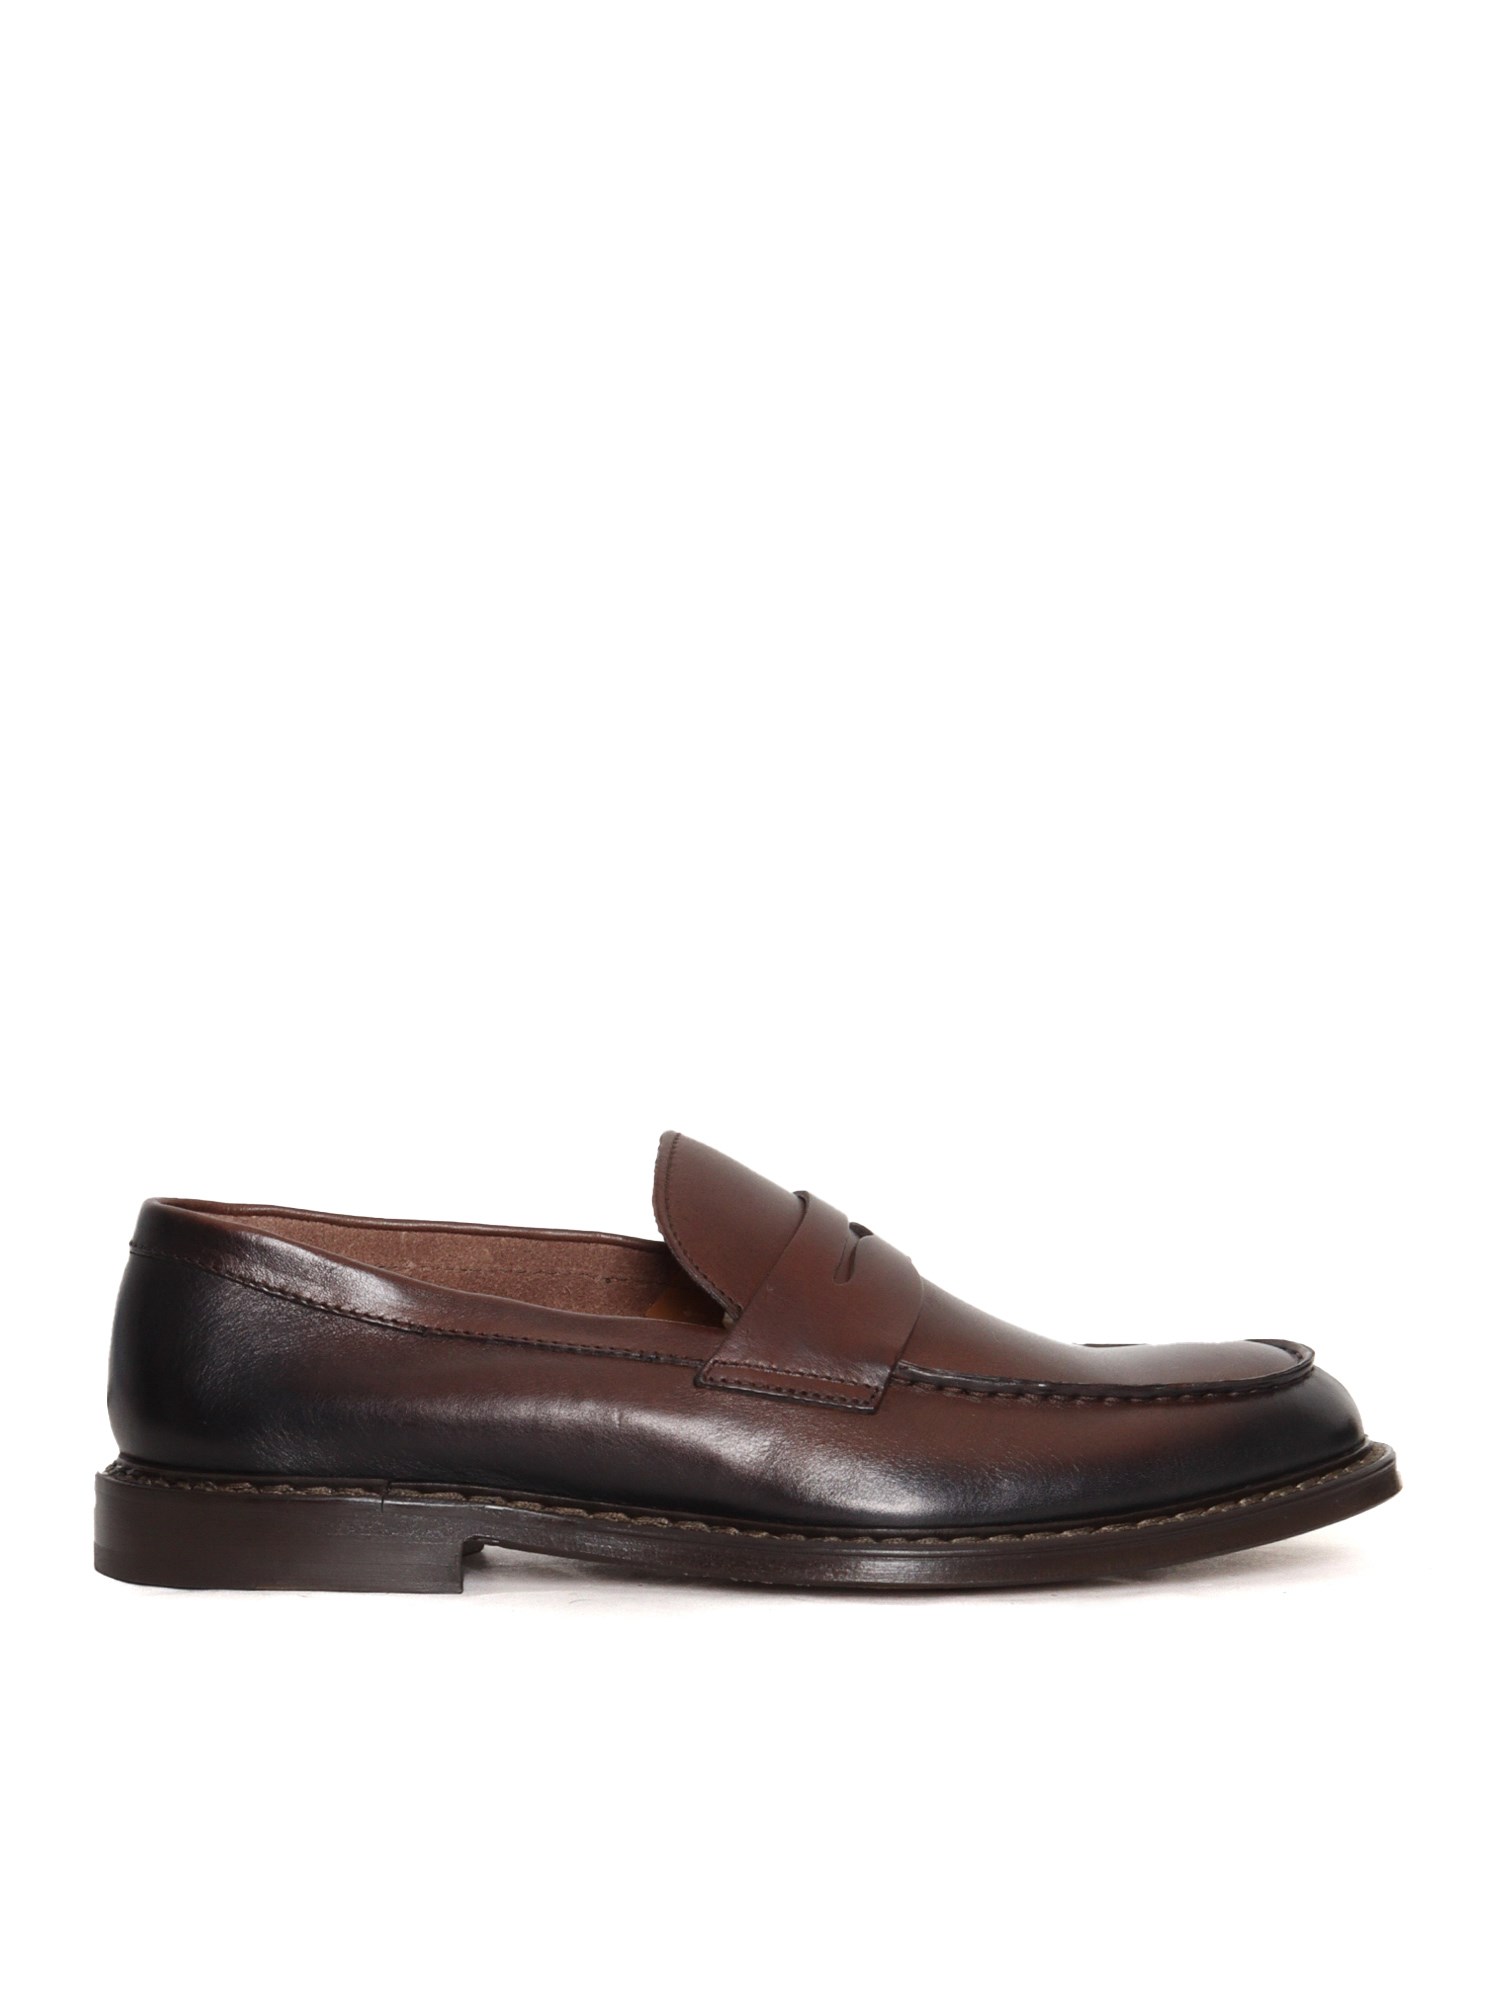 Doucal's Brown Leather Loafer